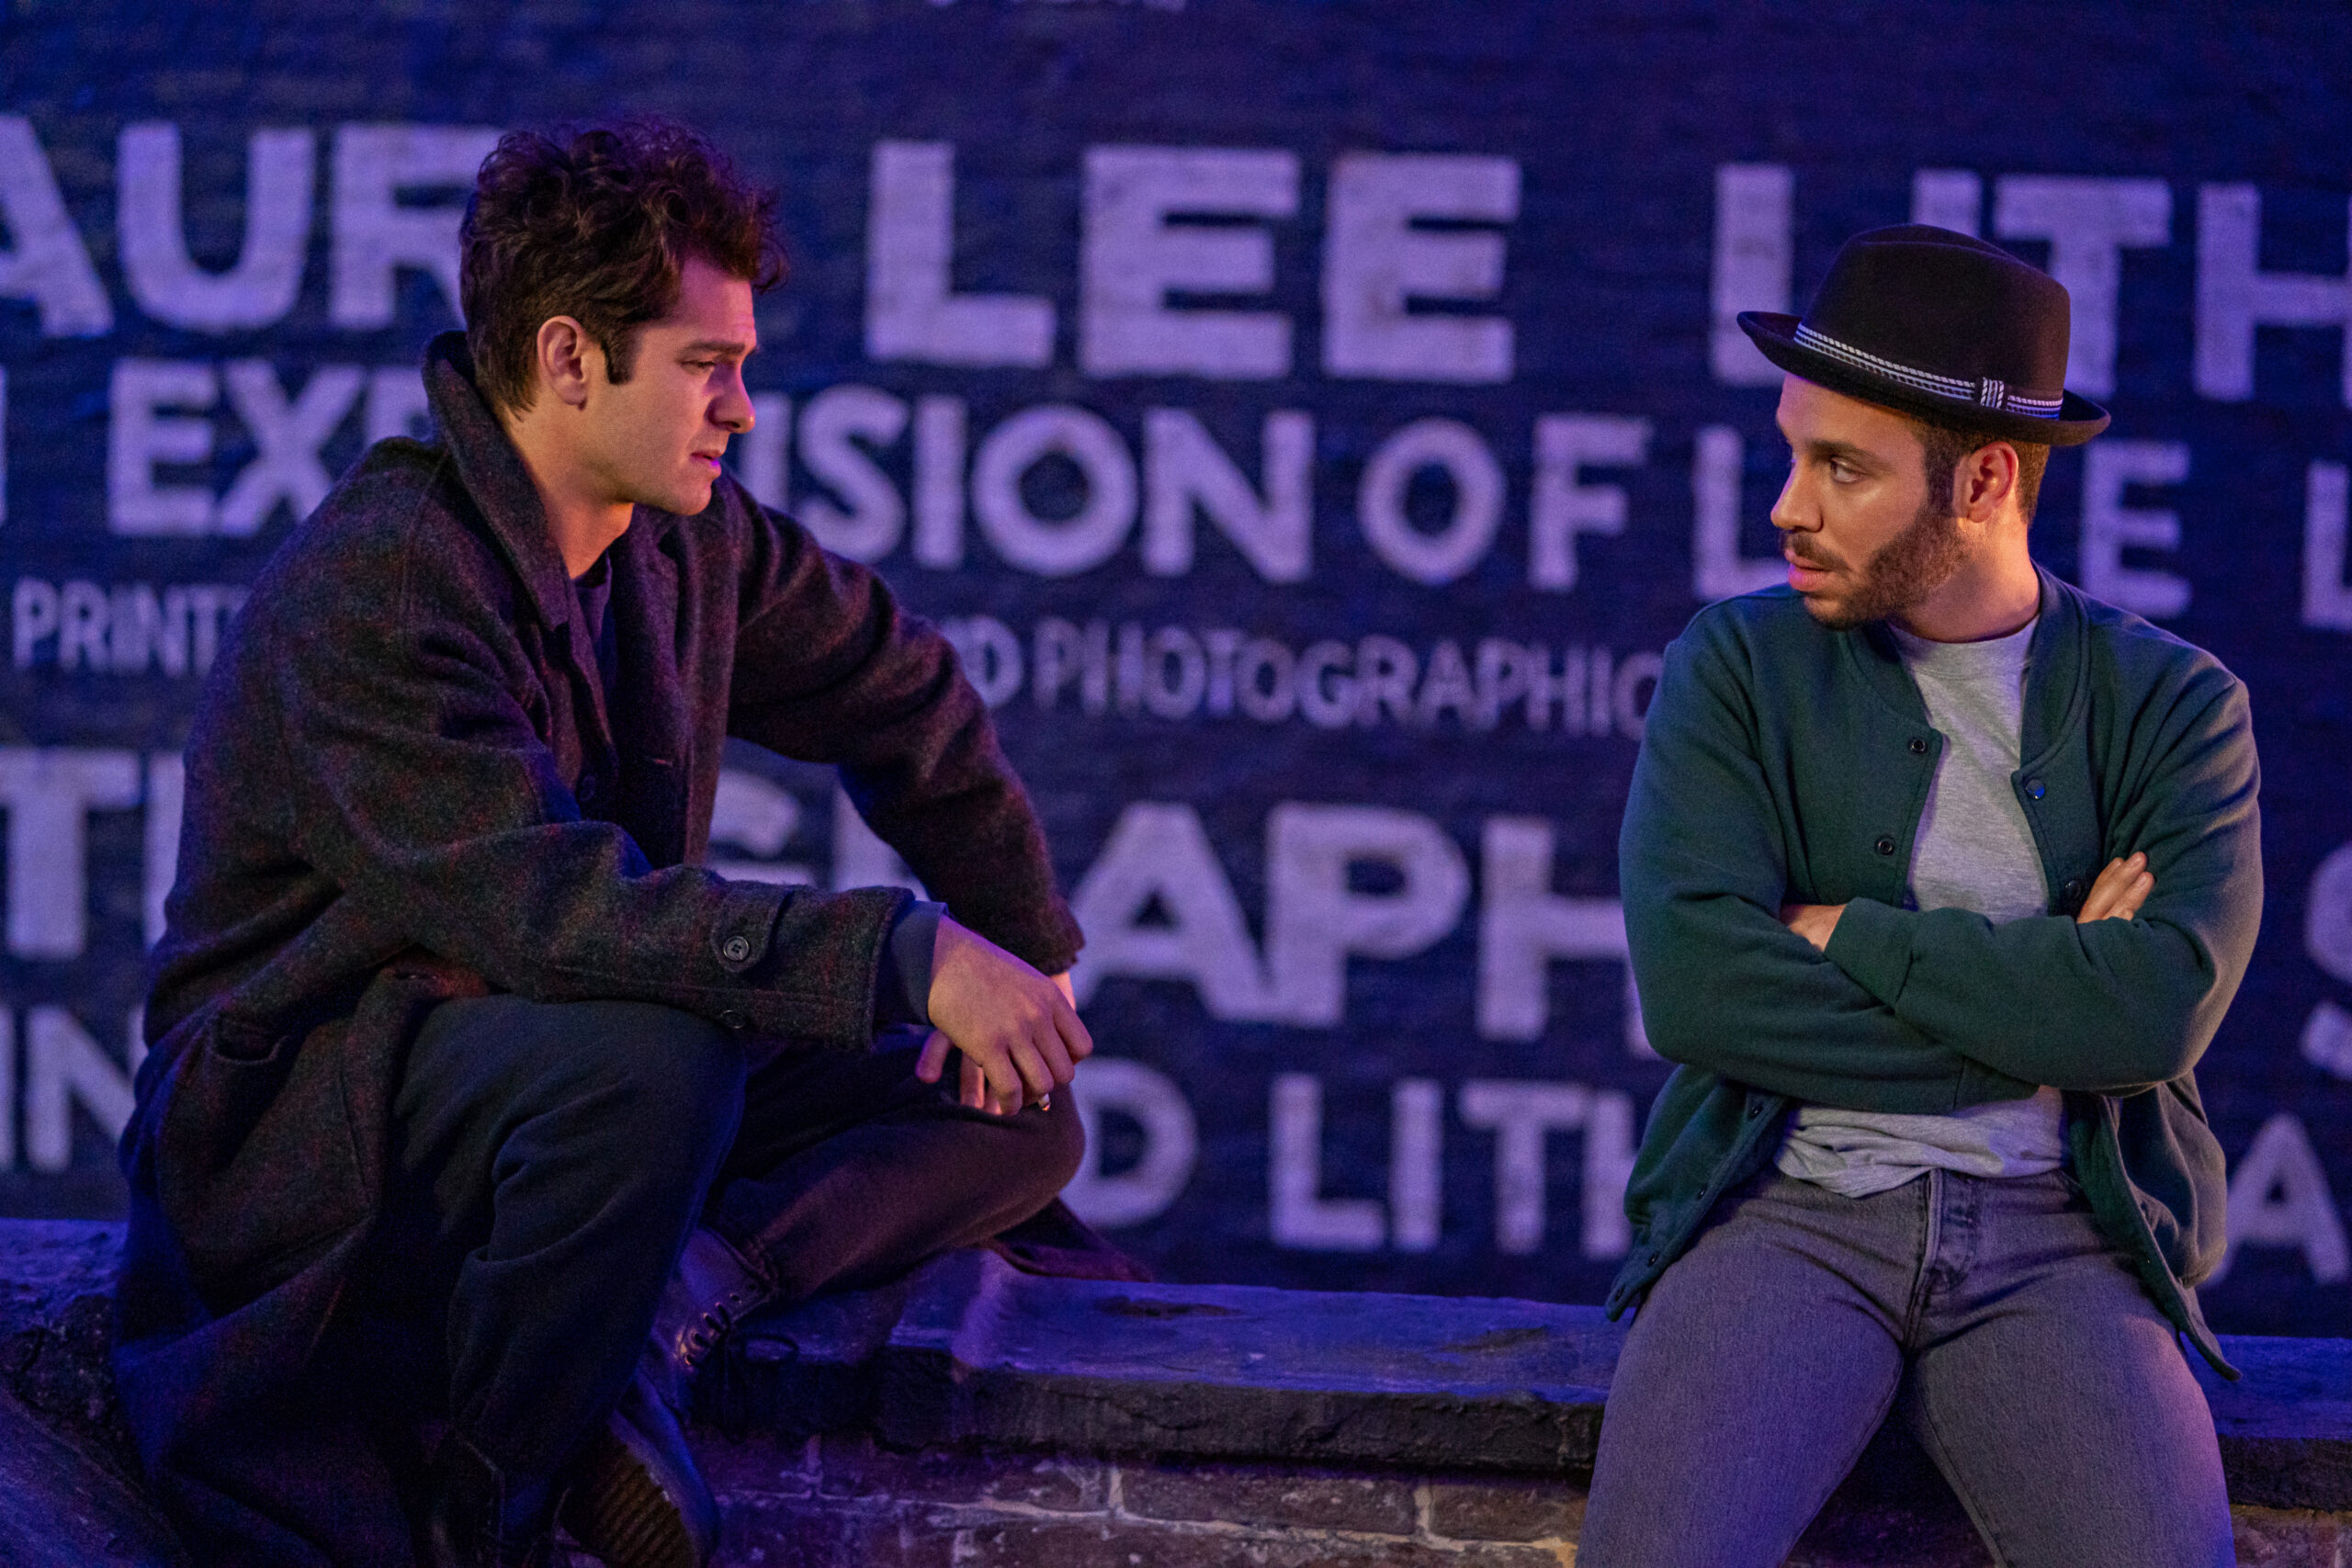 Andrew Garfield as Jonathan Larson and Robin de Jesus as Michael in <i>tick, tick...BOOM!</i>. Photo by Macall Polay for Netflix.